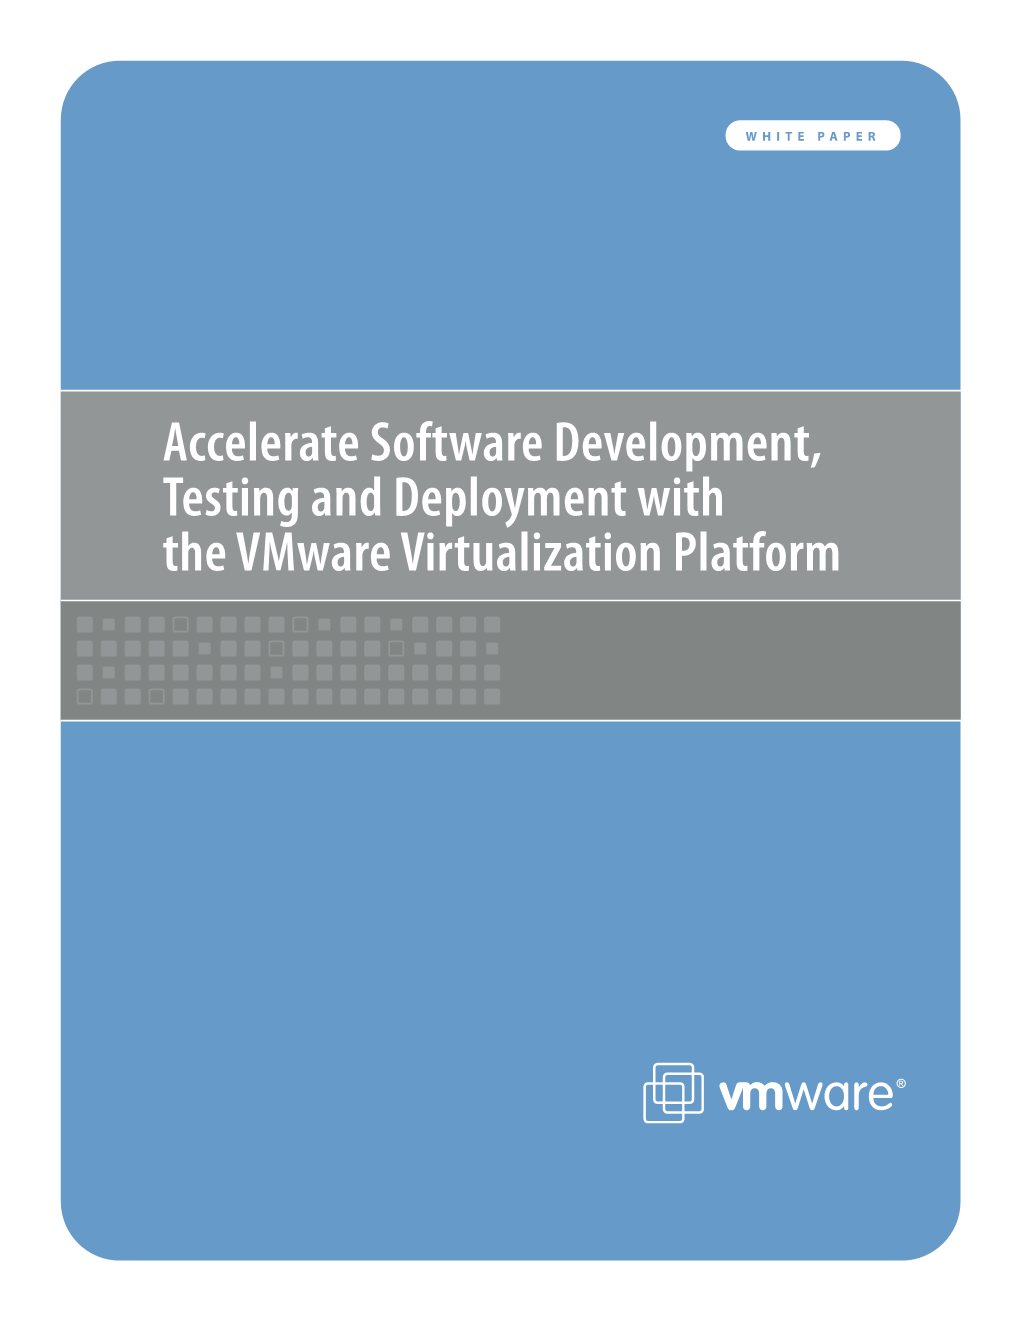 Accelerate Software Development, Testing and Deployment with the Vmware Virtualization Platform